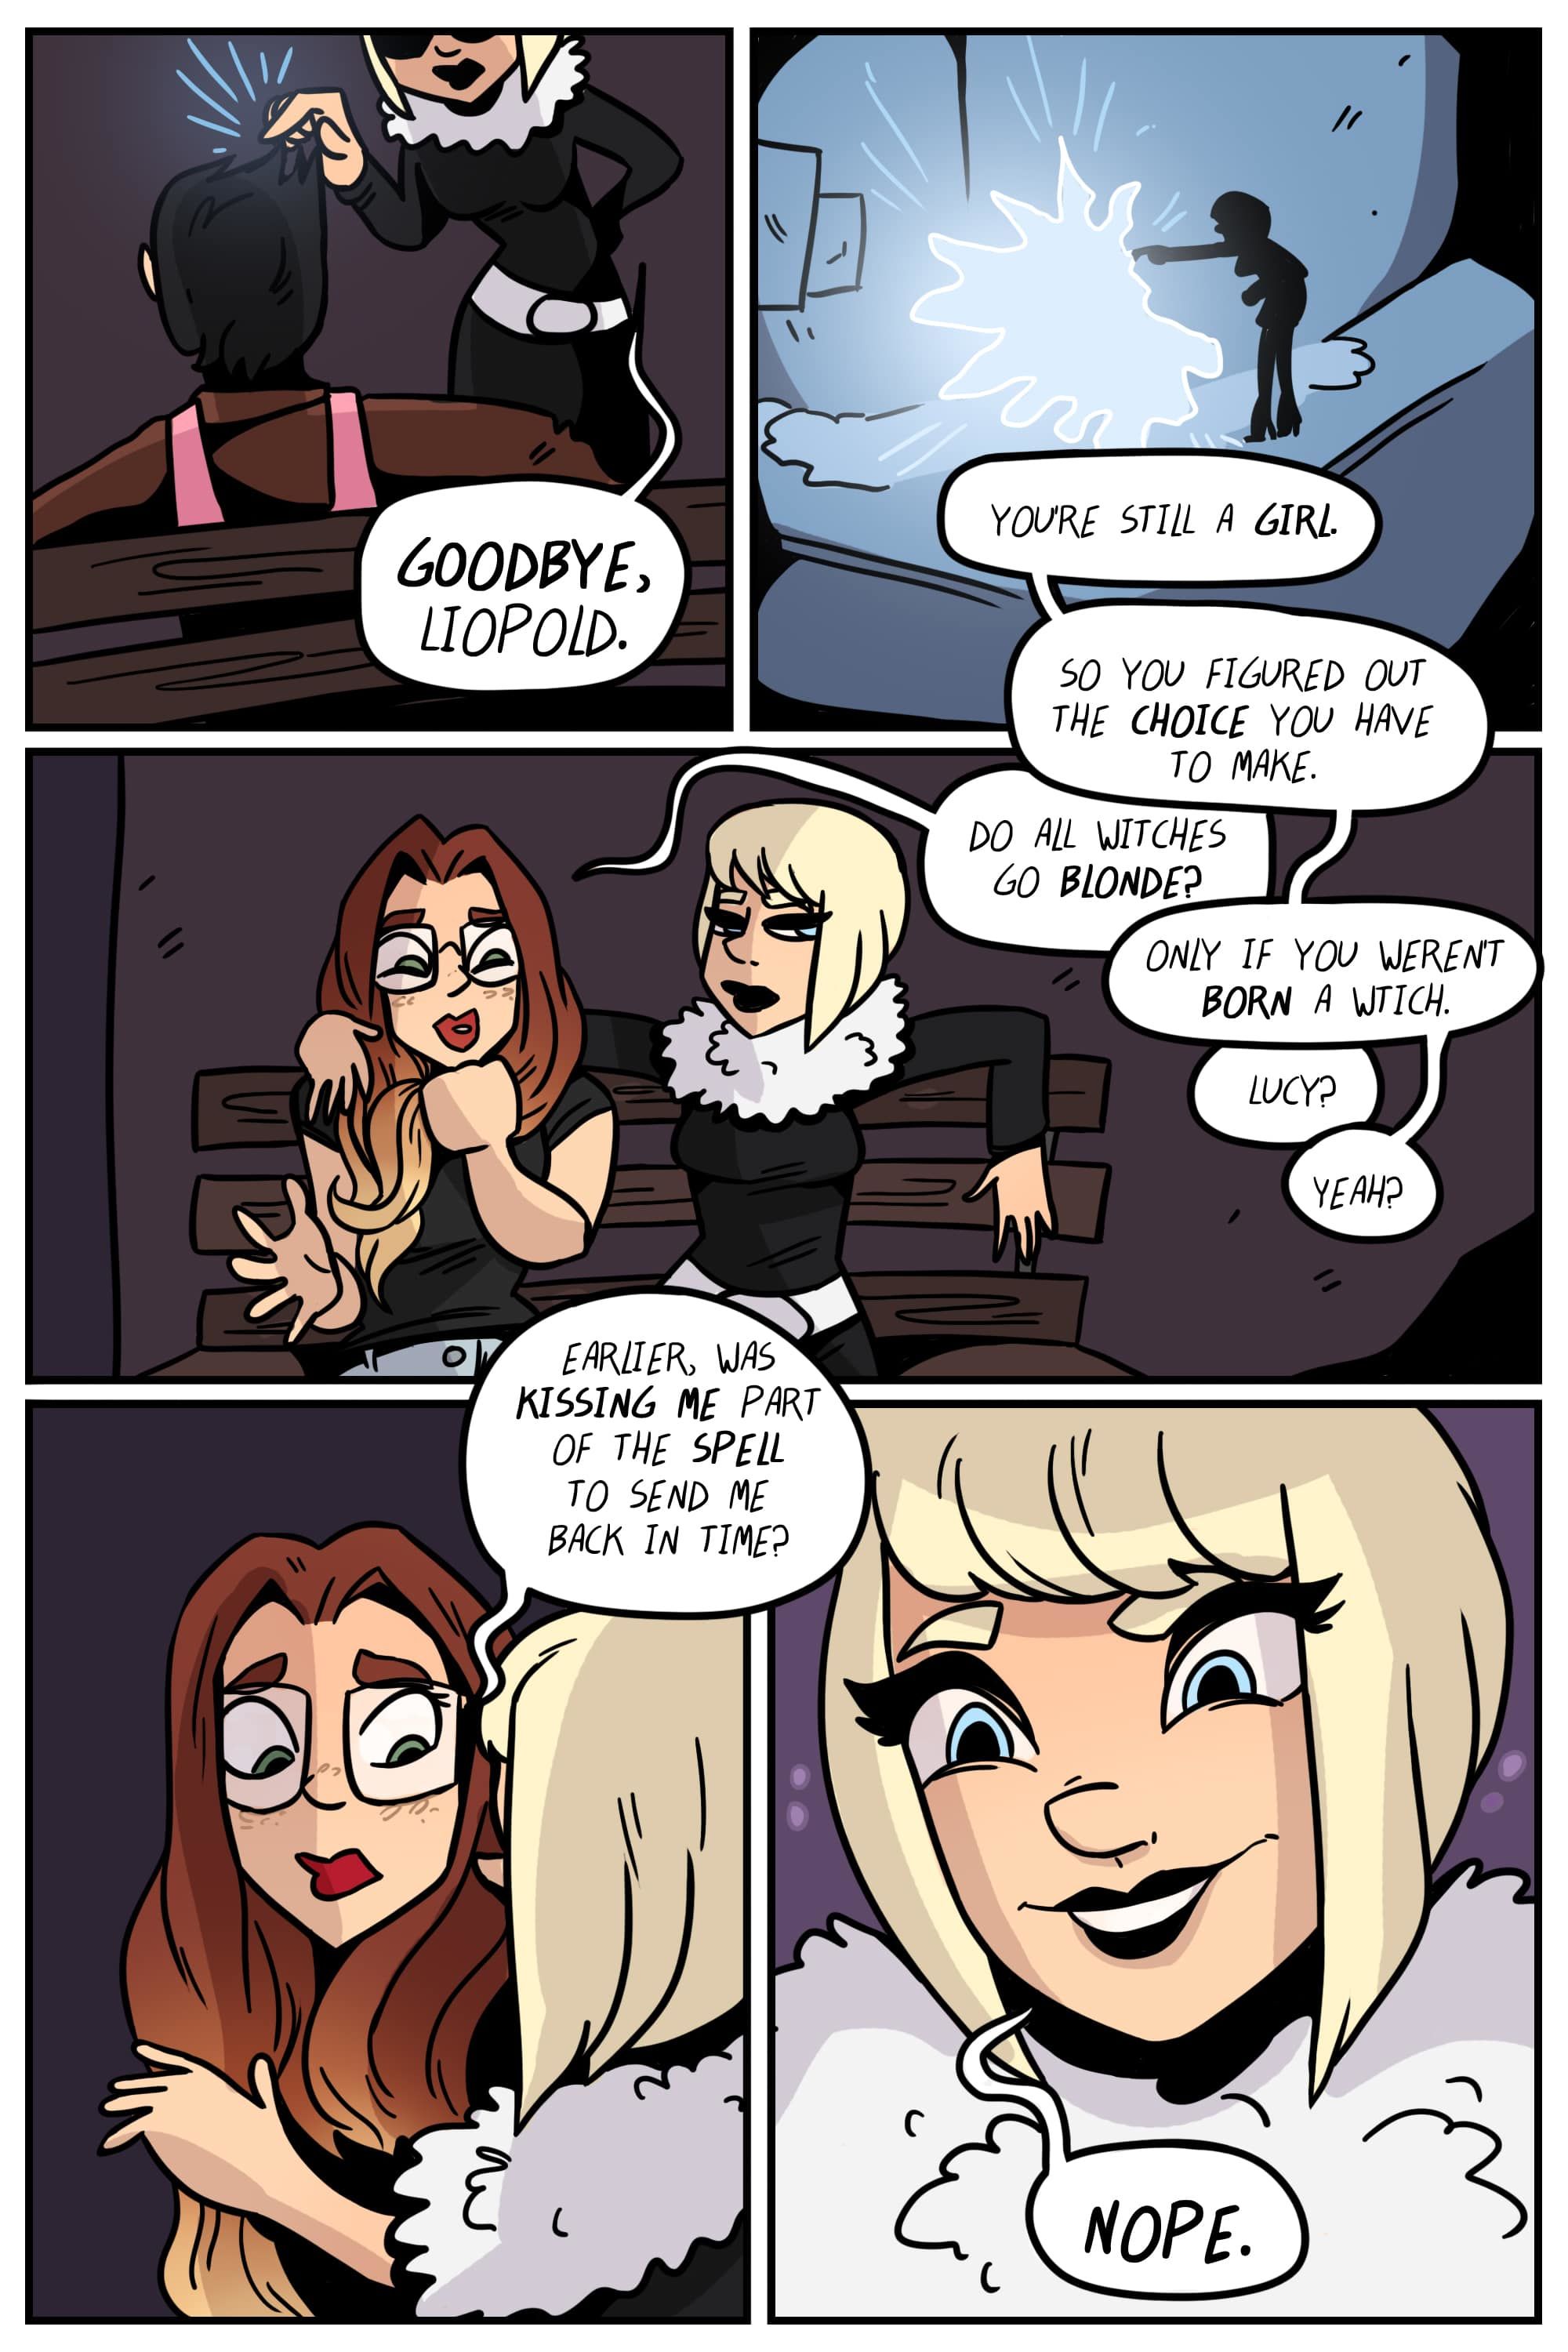 The New Girl Issue 1-5 by Grumpy TG page 55